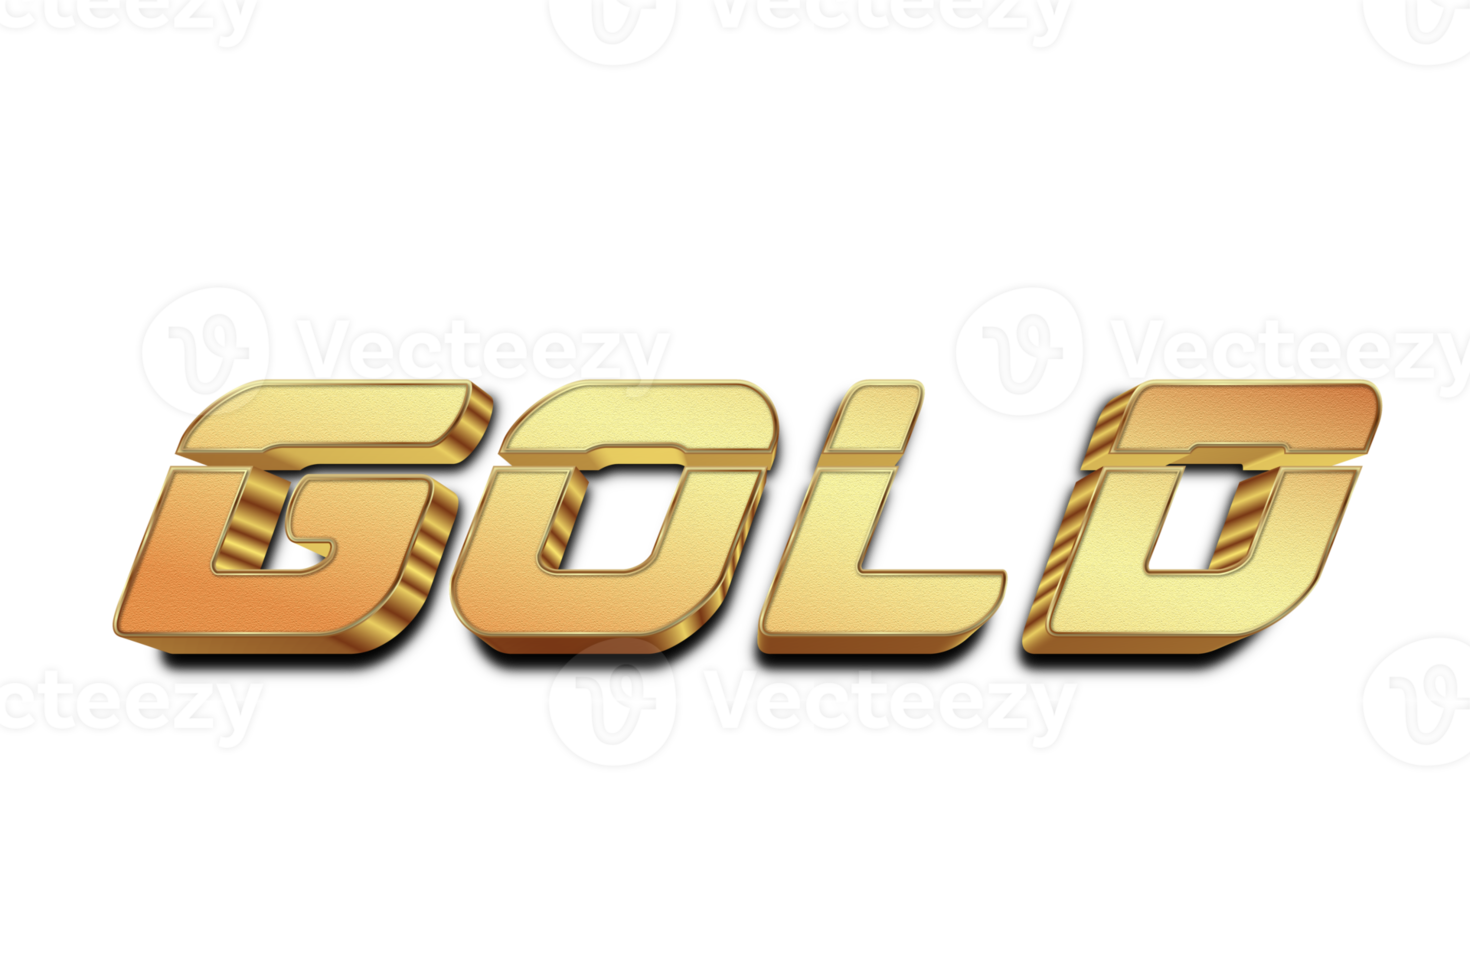 GOLD STYLE TEXT EFFECT PNG